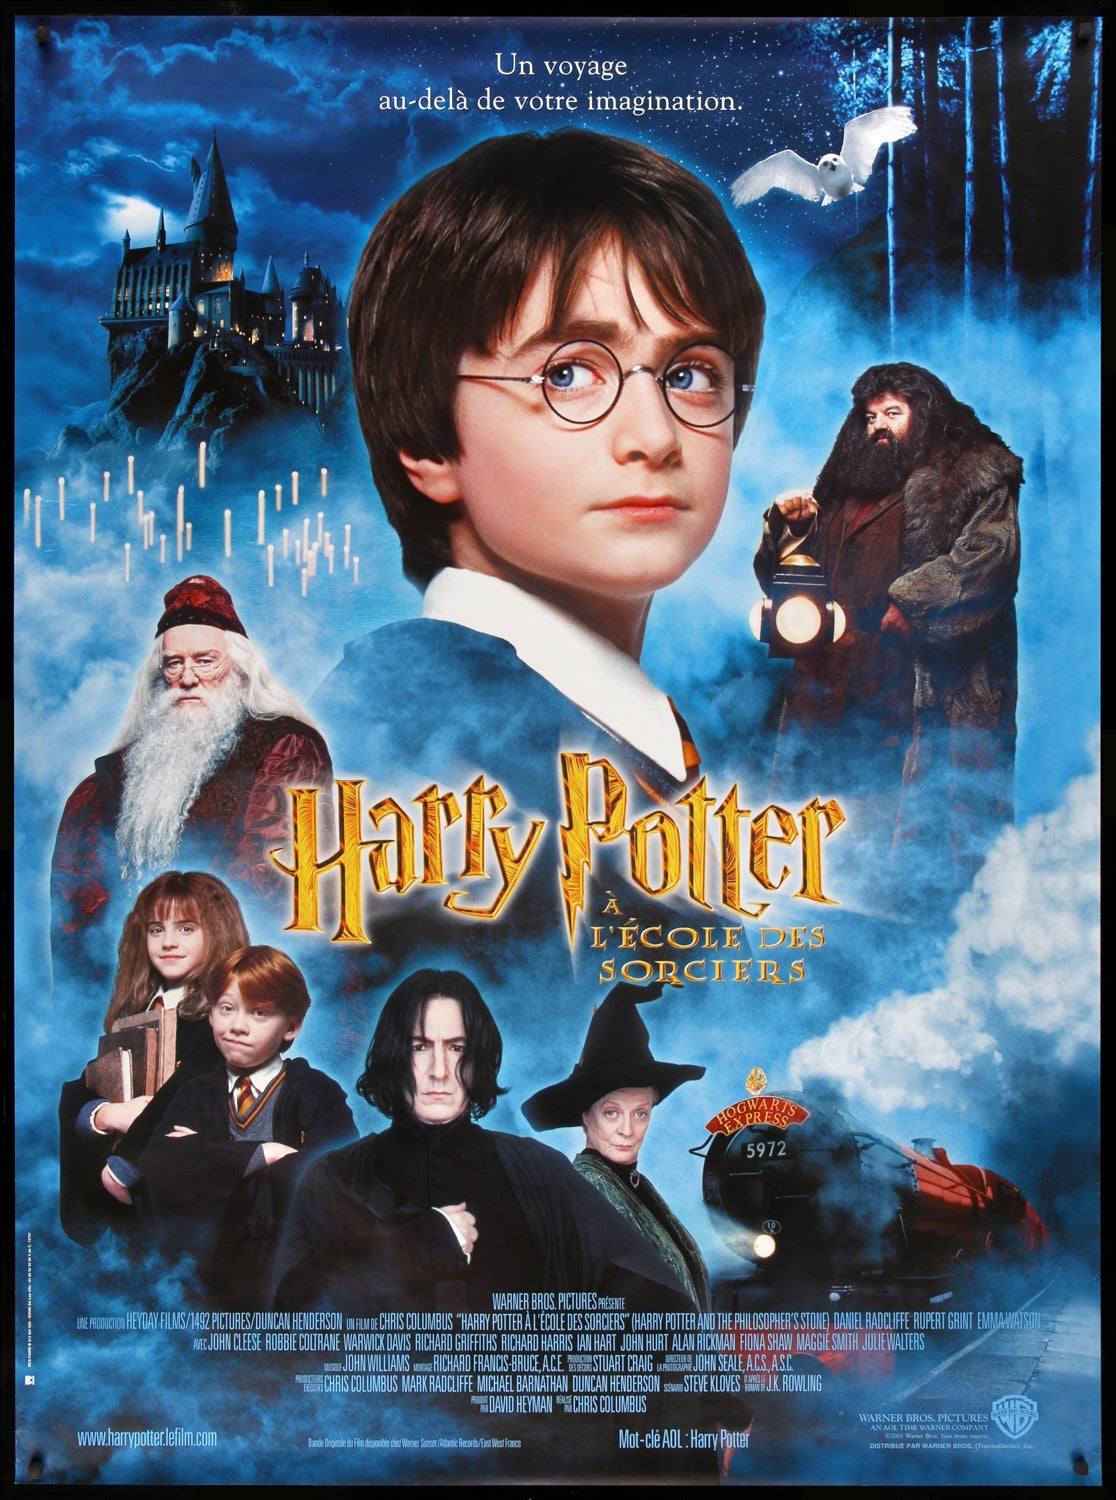 Harry Potter & the Philosopher's Stone French Grande Movie Poster